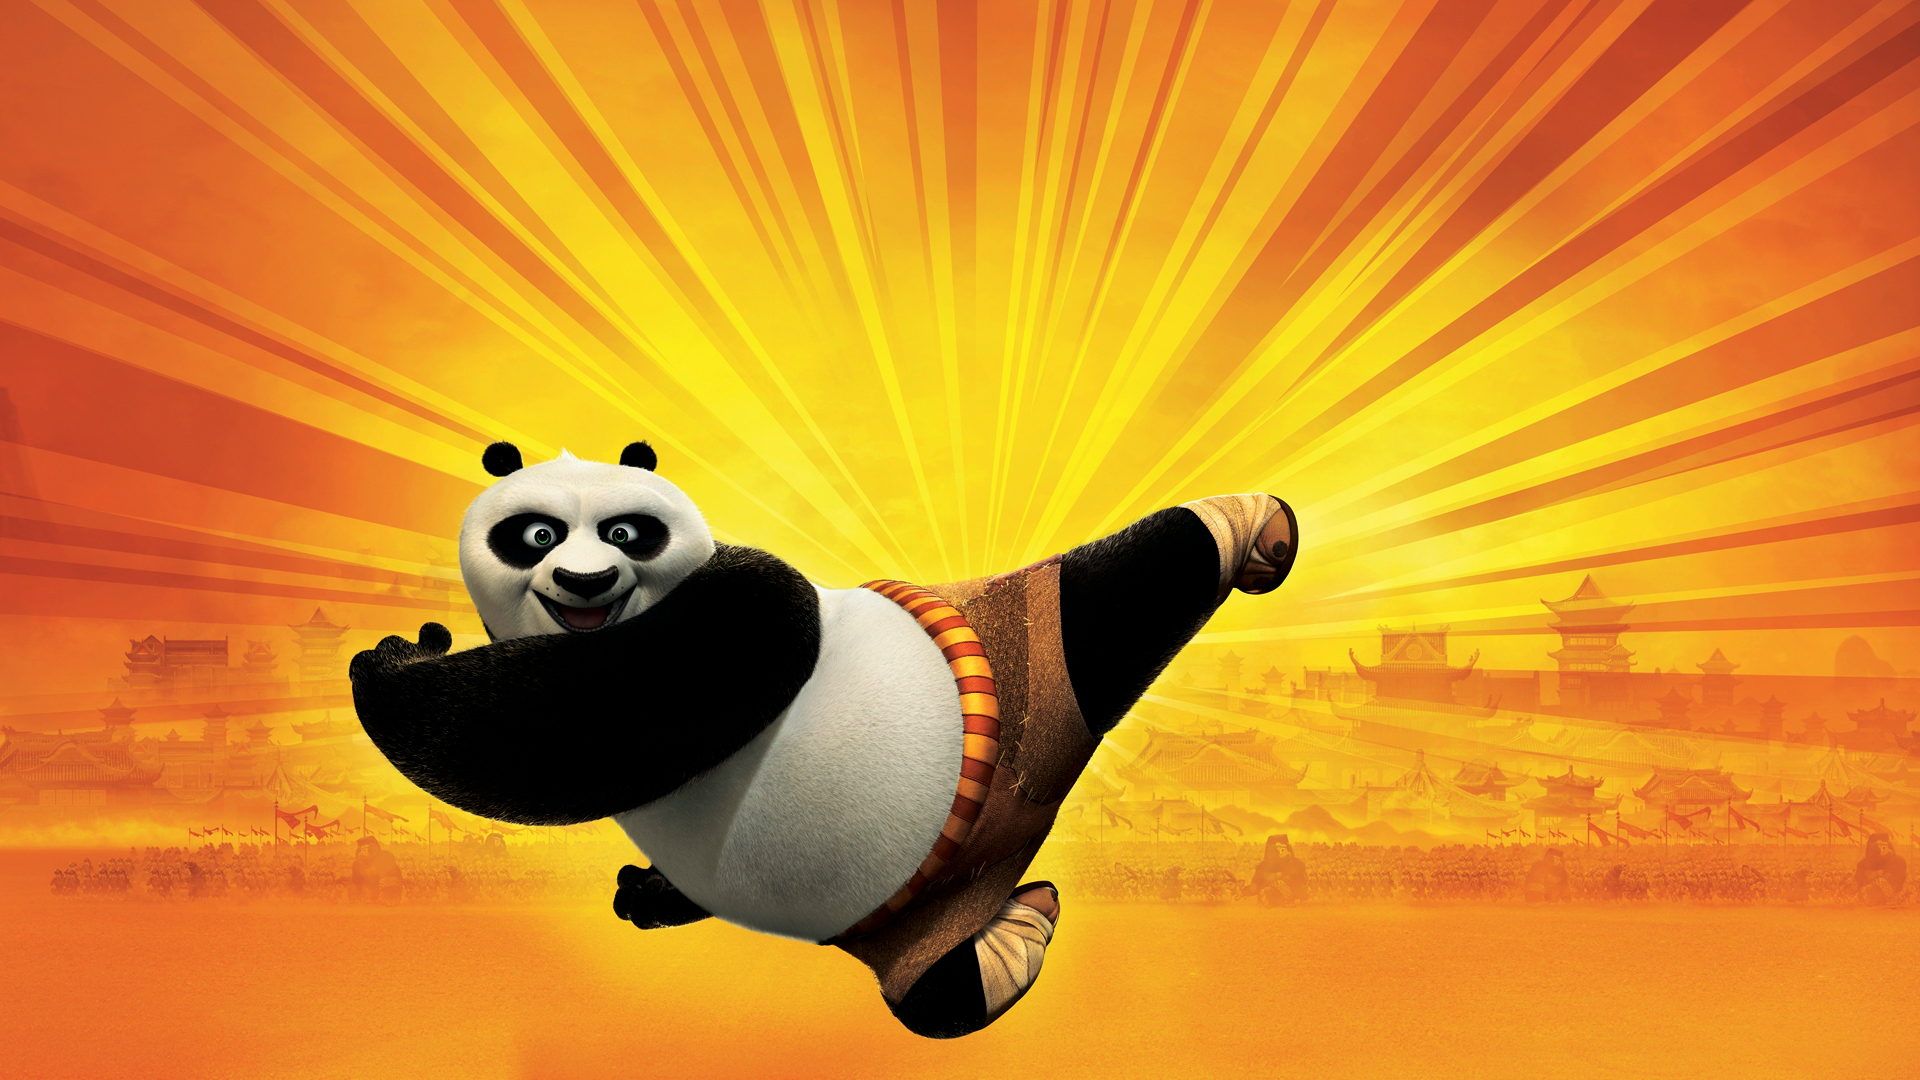 Kung Fu Panda Wallpapers HD Wallpapers, Backgrounds, Images, Art